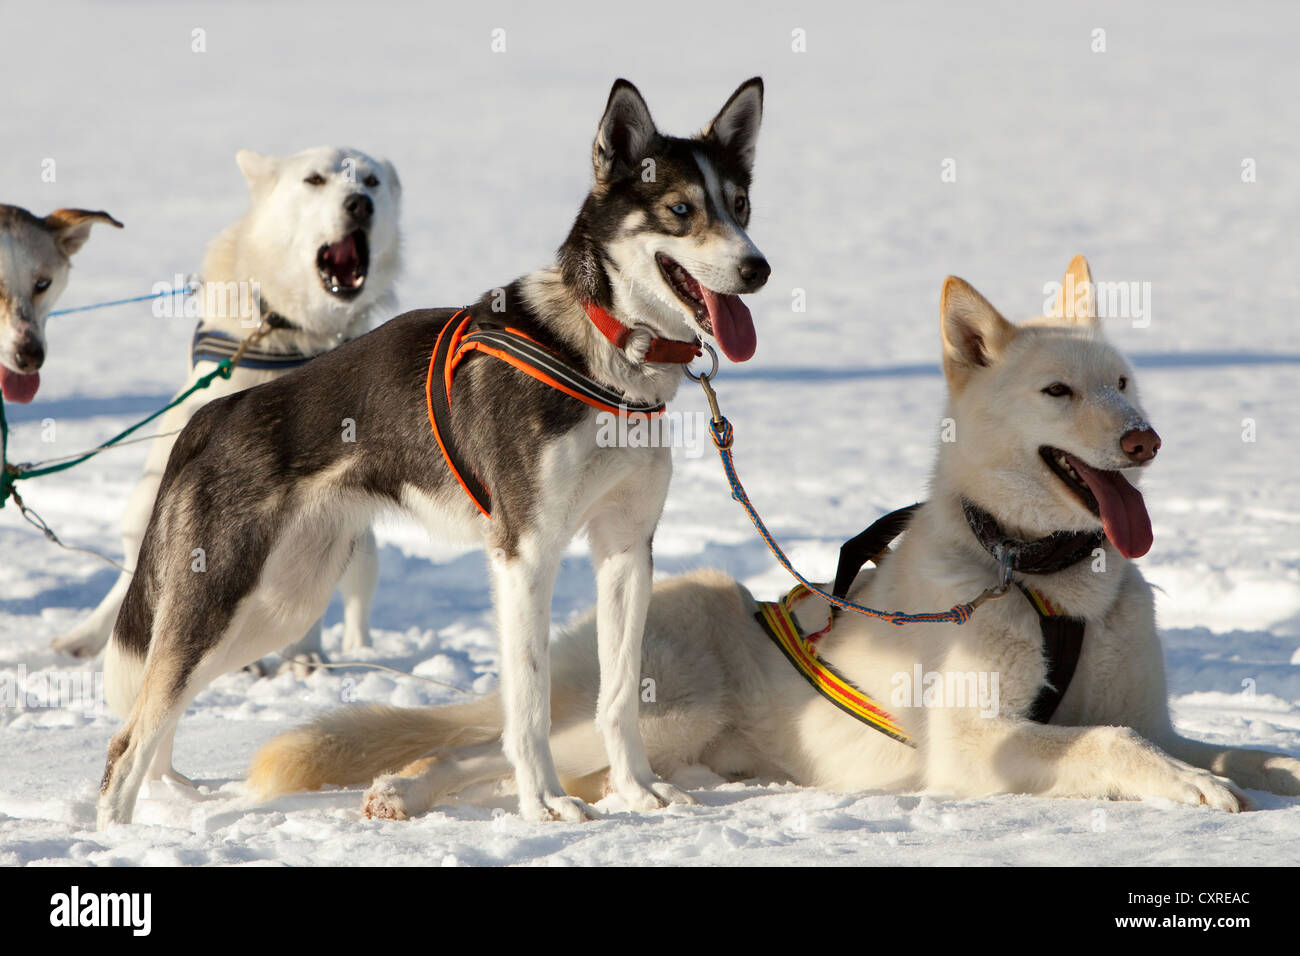 Sled dogs, lead dogs, Alaskan Huskies, in harness, panting, resting in snow, frozen Lake Laberge, Yukon Territory, Canada Stock Photo